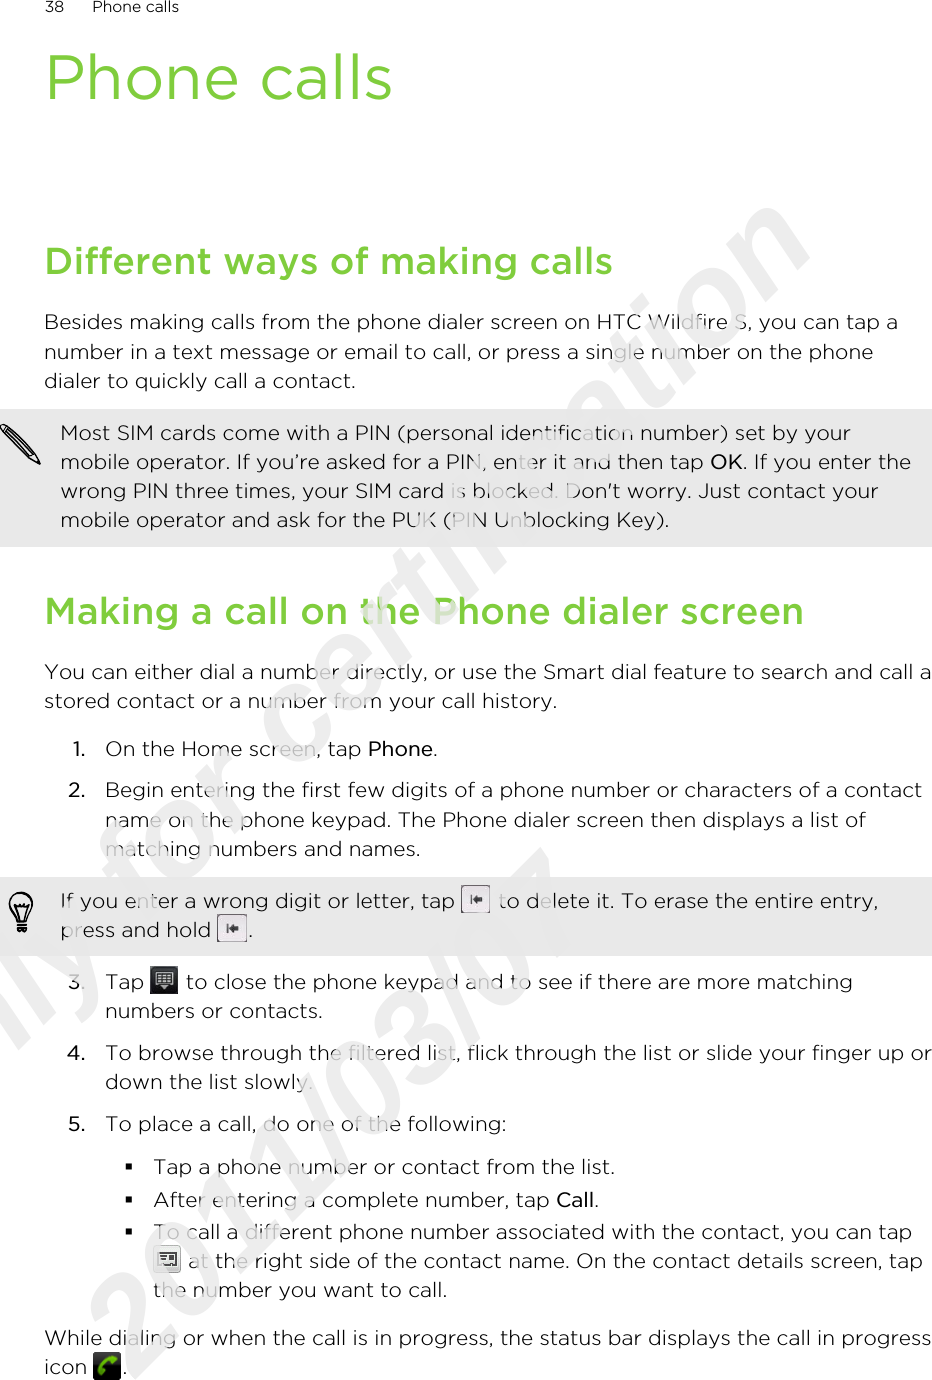 Phone callsDifferent ways of making callsBesides making calls from the phone dialer screen on HTC Wildfire S, you can tap anumber in a text message or email to call, or press a single number on the phonedialer to quickly call a contact.Most SIM cards come with a PIN (personal identification number) set by yourmobile operator. If you’re asked for a PIN, enter it and then tap OK. If you enter thewrong PIN three times, your SIM card is blocked. Don&apos;t worry. Just contact yourmobile operator and ask for the PUK (PIN Unblocking Key).Making a call on the Phone dialer screenYou can either dial a number directly, or use the Smart dial feature to search and call astored contact or a number from your call history.1. On the Home screen, tap Phone.2. Begin entering the first few digits of a phone number or characters of a contactname on the phone keypad. The Phone dialer screen then displays a list ofmatching numbers and names.If you enter a wrong digit or letter, tap   to delete it. To erase the entire entry,press and hold  .3. Tap   to close the phone keypad and to see if there are more matchingnumbers or contacts.4. To browse through the filtered list, flick through the list or slide your finger up ordown the list slowly.5. To place a call, do one of the following:§Tap a phone number or contact from the list.§After entering a complete number, tap Call.§To call a different phone number associated with the contact, you can tap at the right side of the contact name. On the contact details screen, tapthe number you want to call.While dialing or when the call is in progress, the status bar displays the call in progressicon  .38 Phone callsOnly for certification  2011/03/07